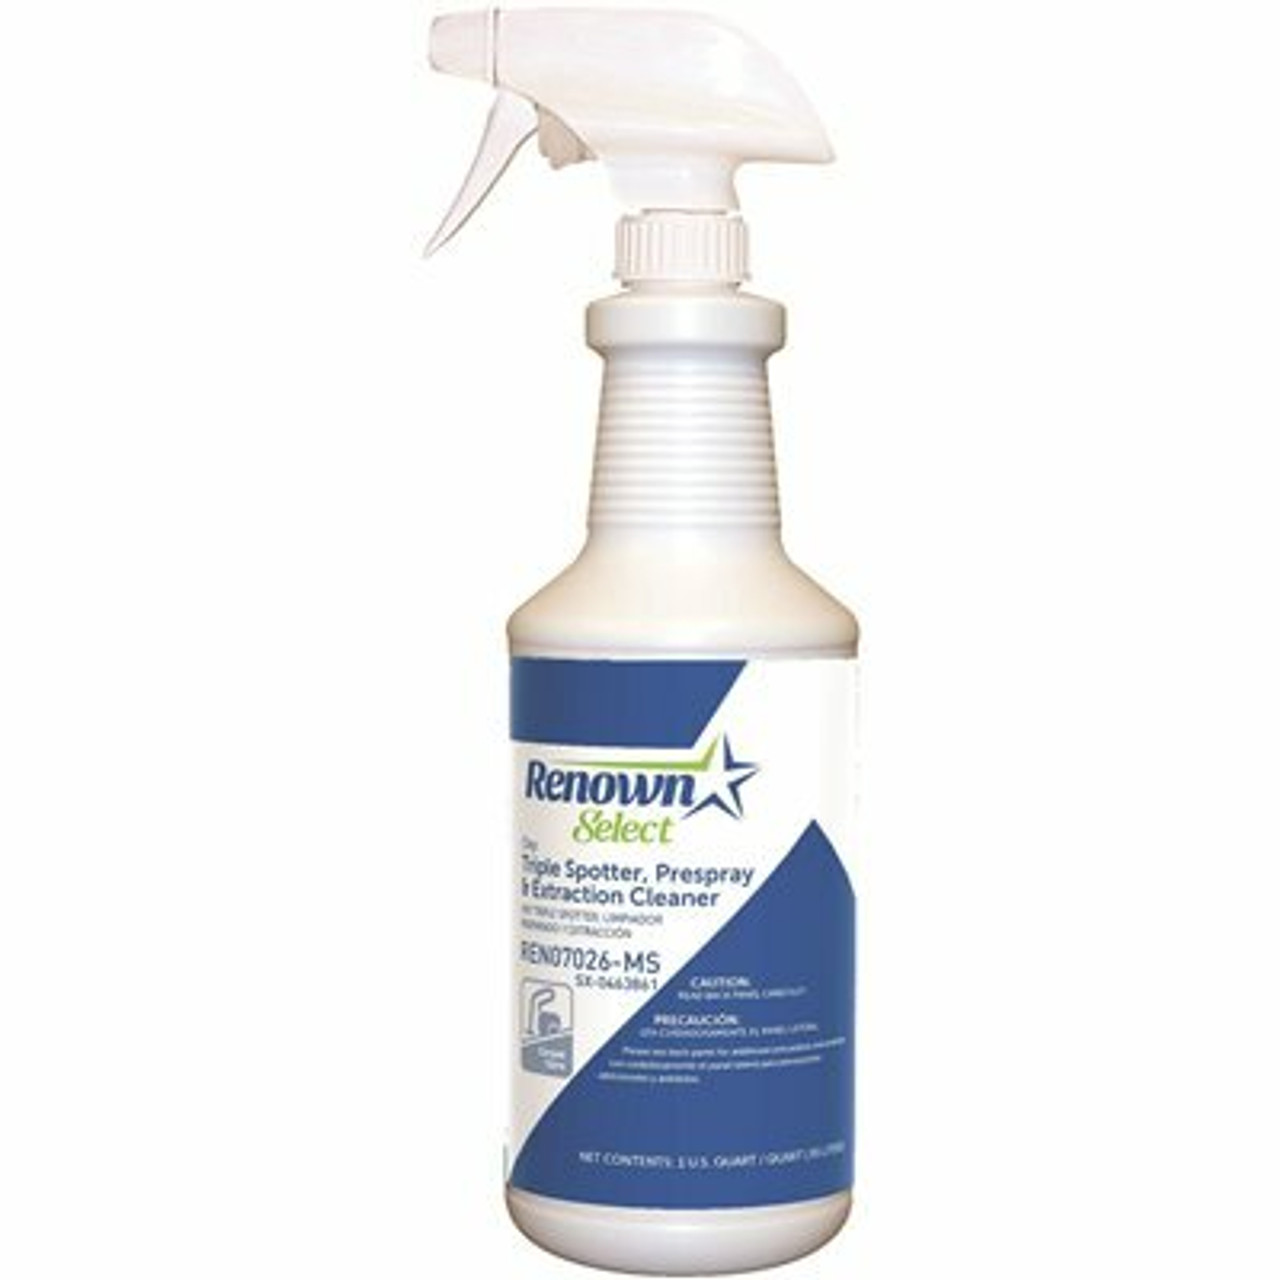 Renown 32 Oz. Oxy Triple Spotter Prespray And Extraction Cleaner